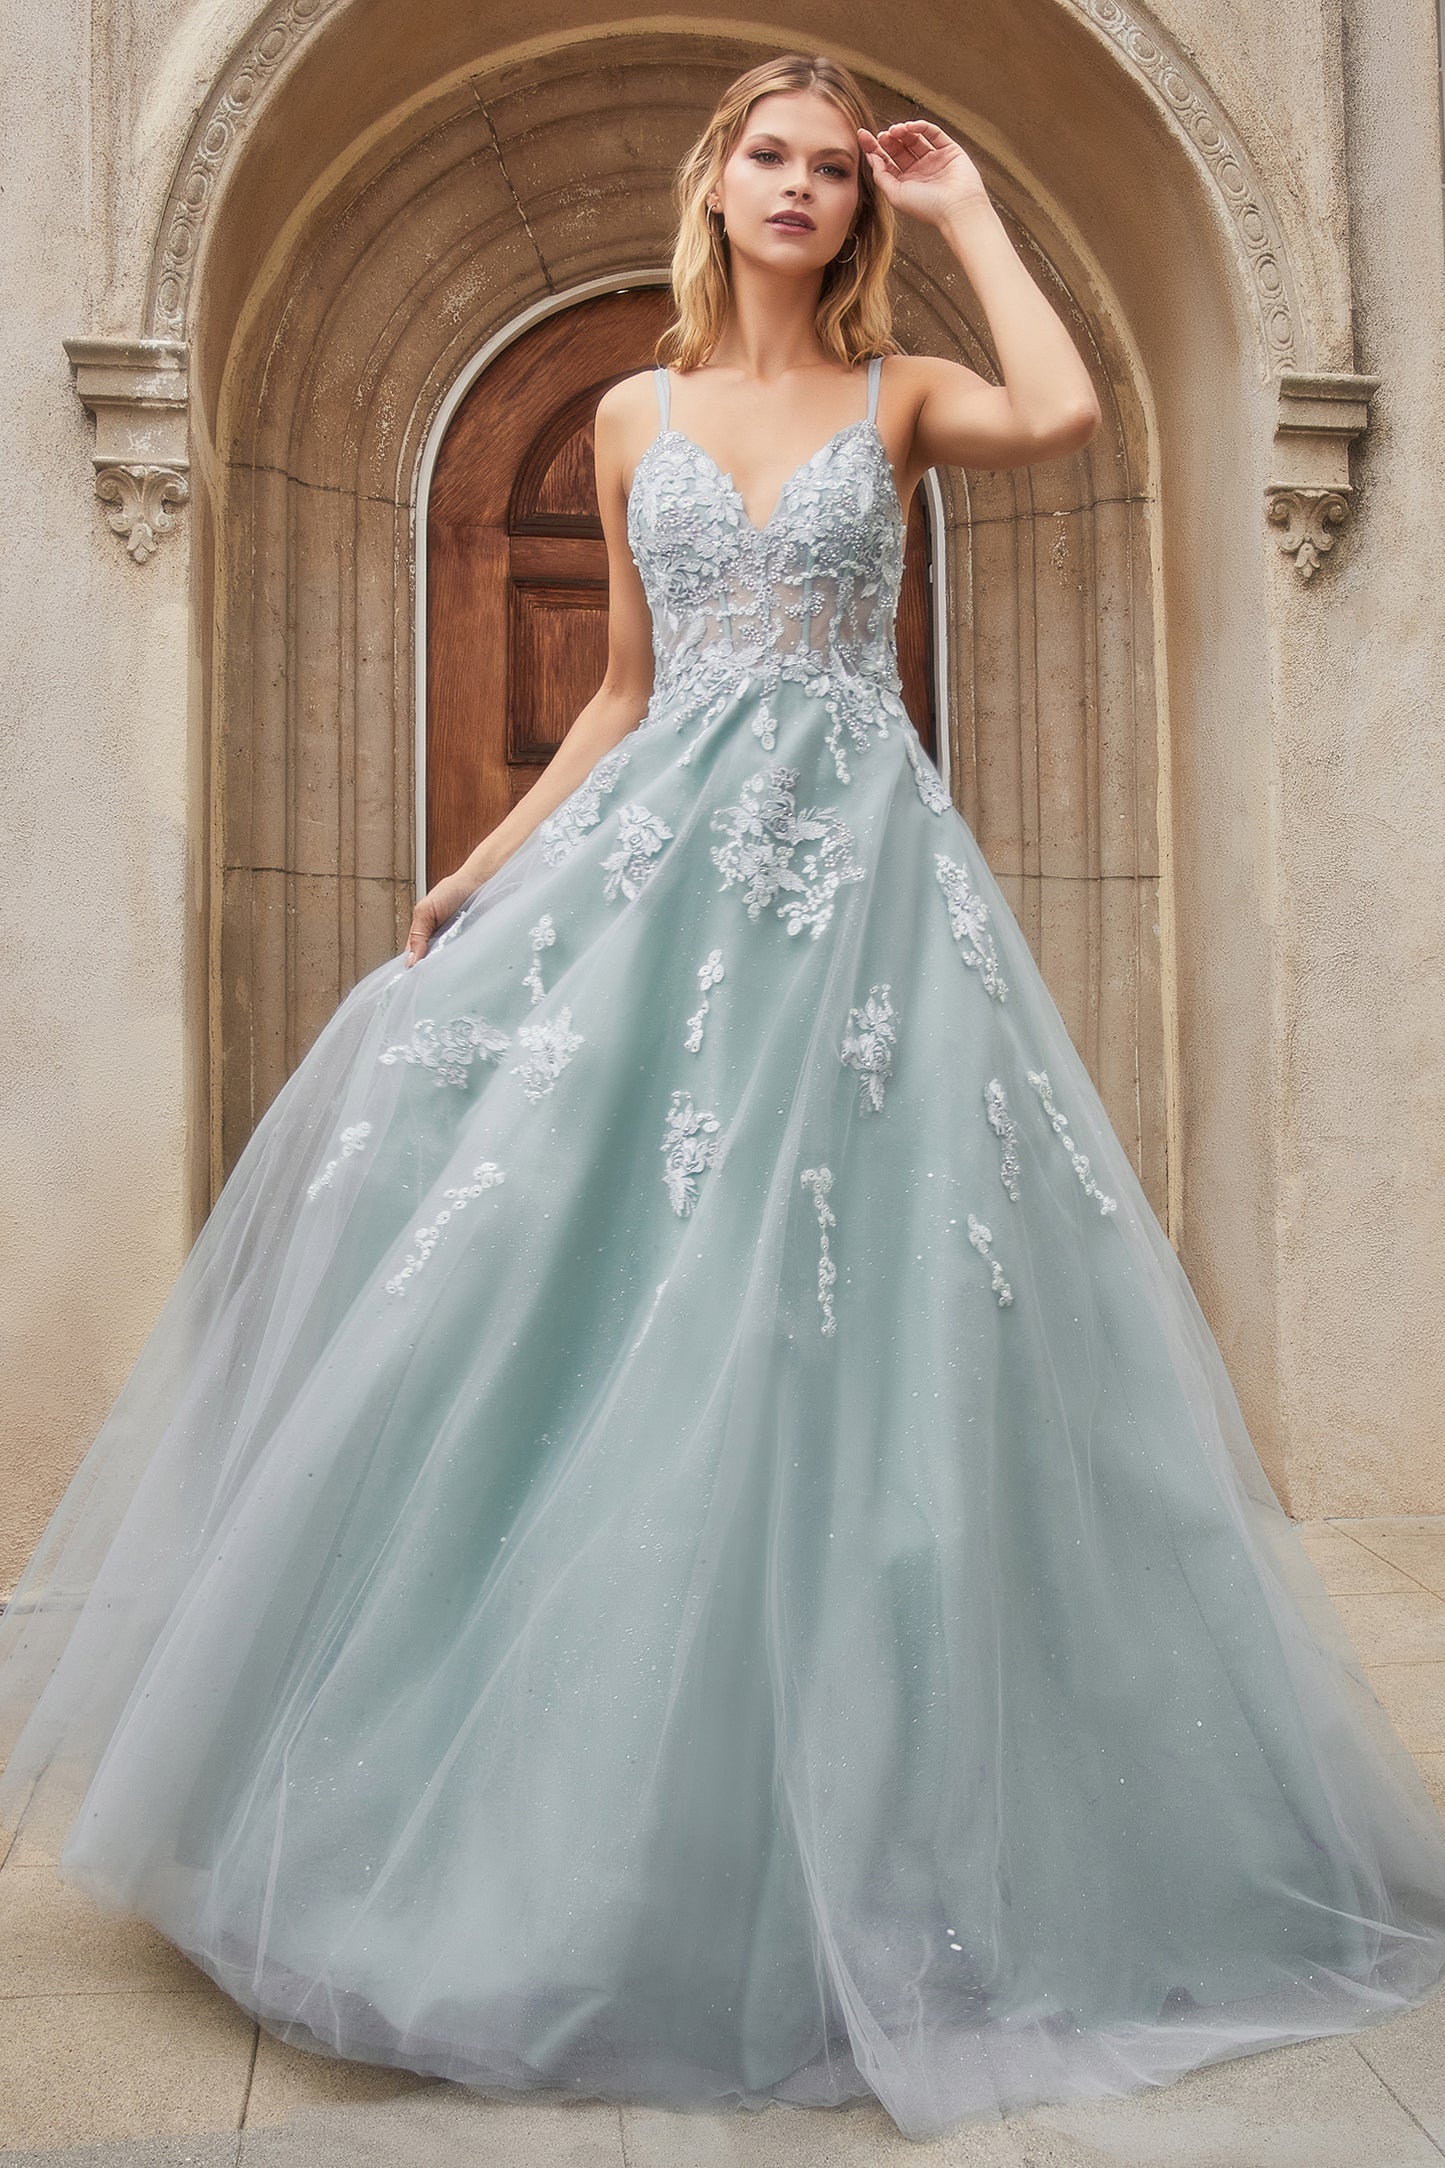 Floral Embroidered Sophia Ball Gown